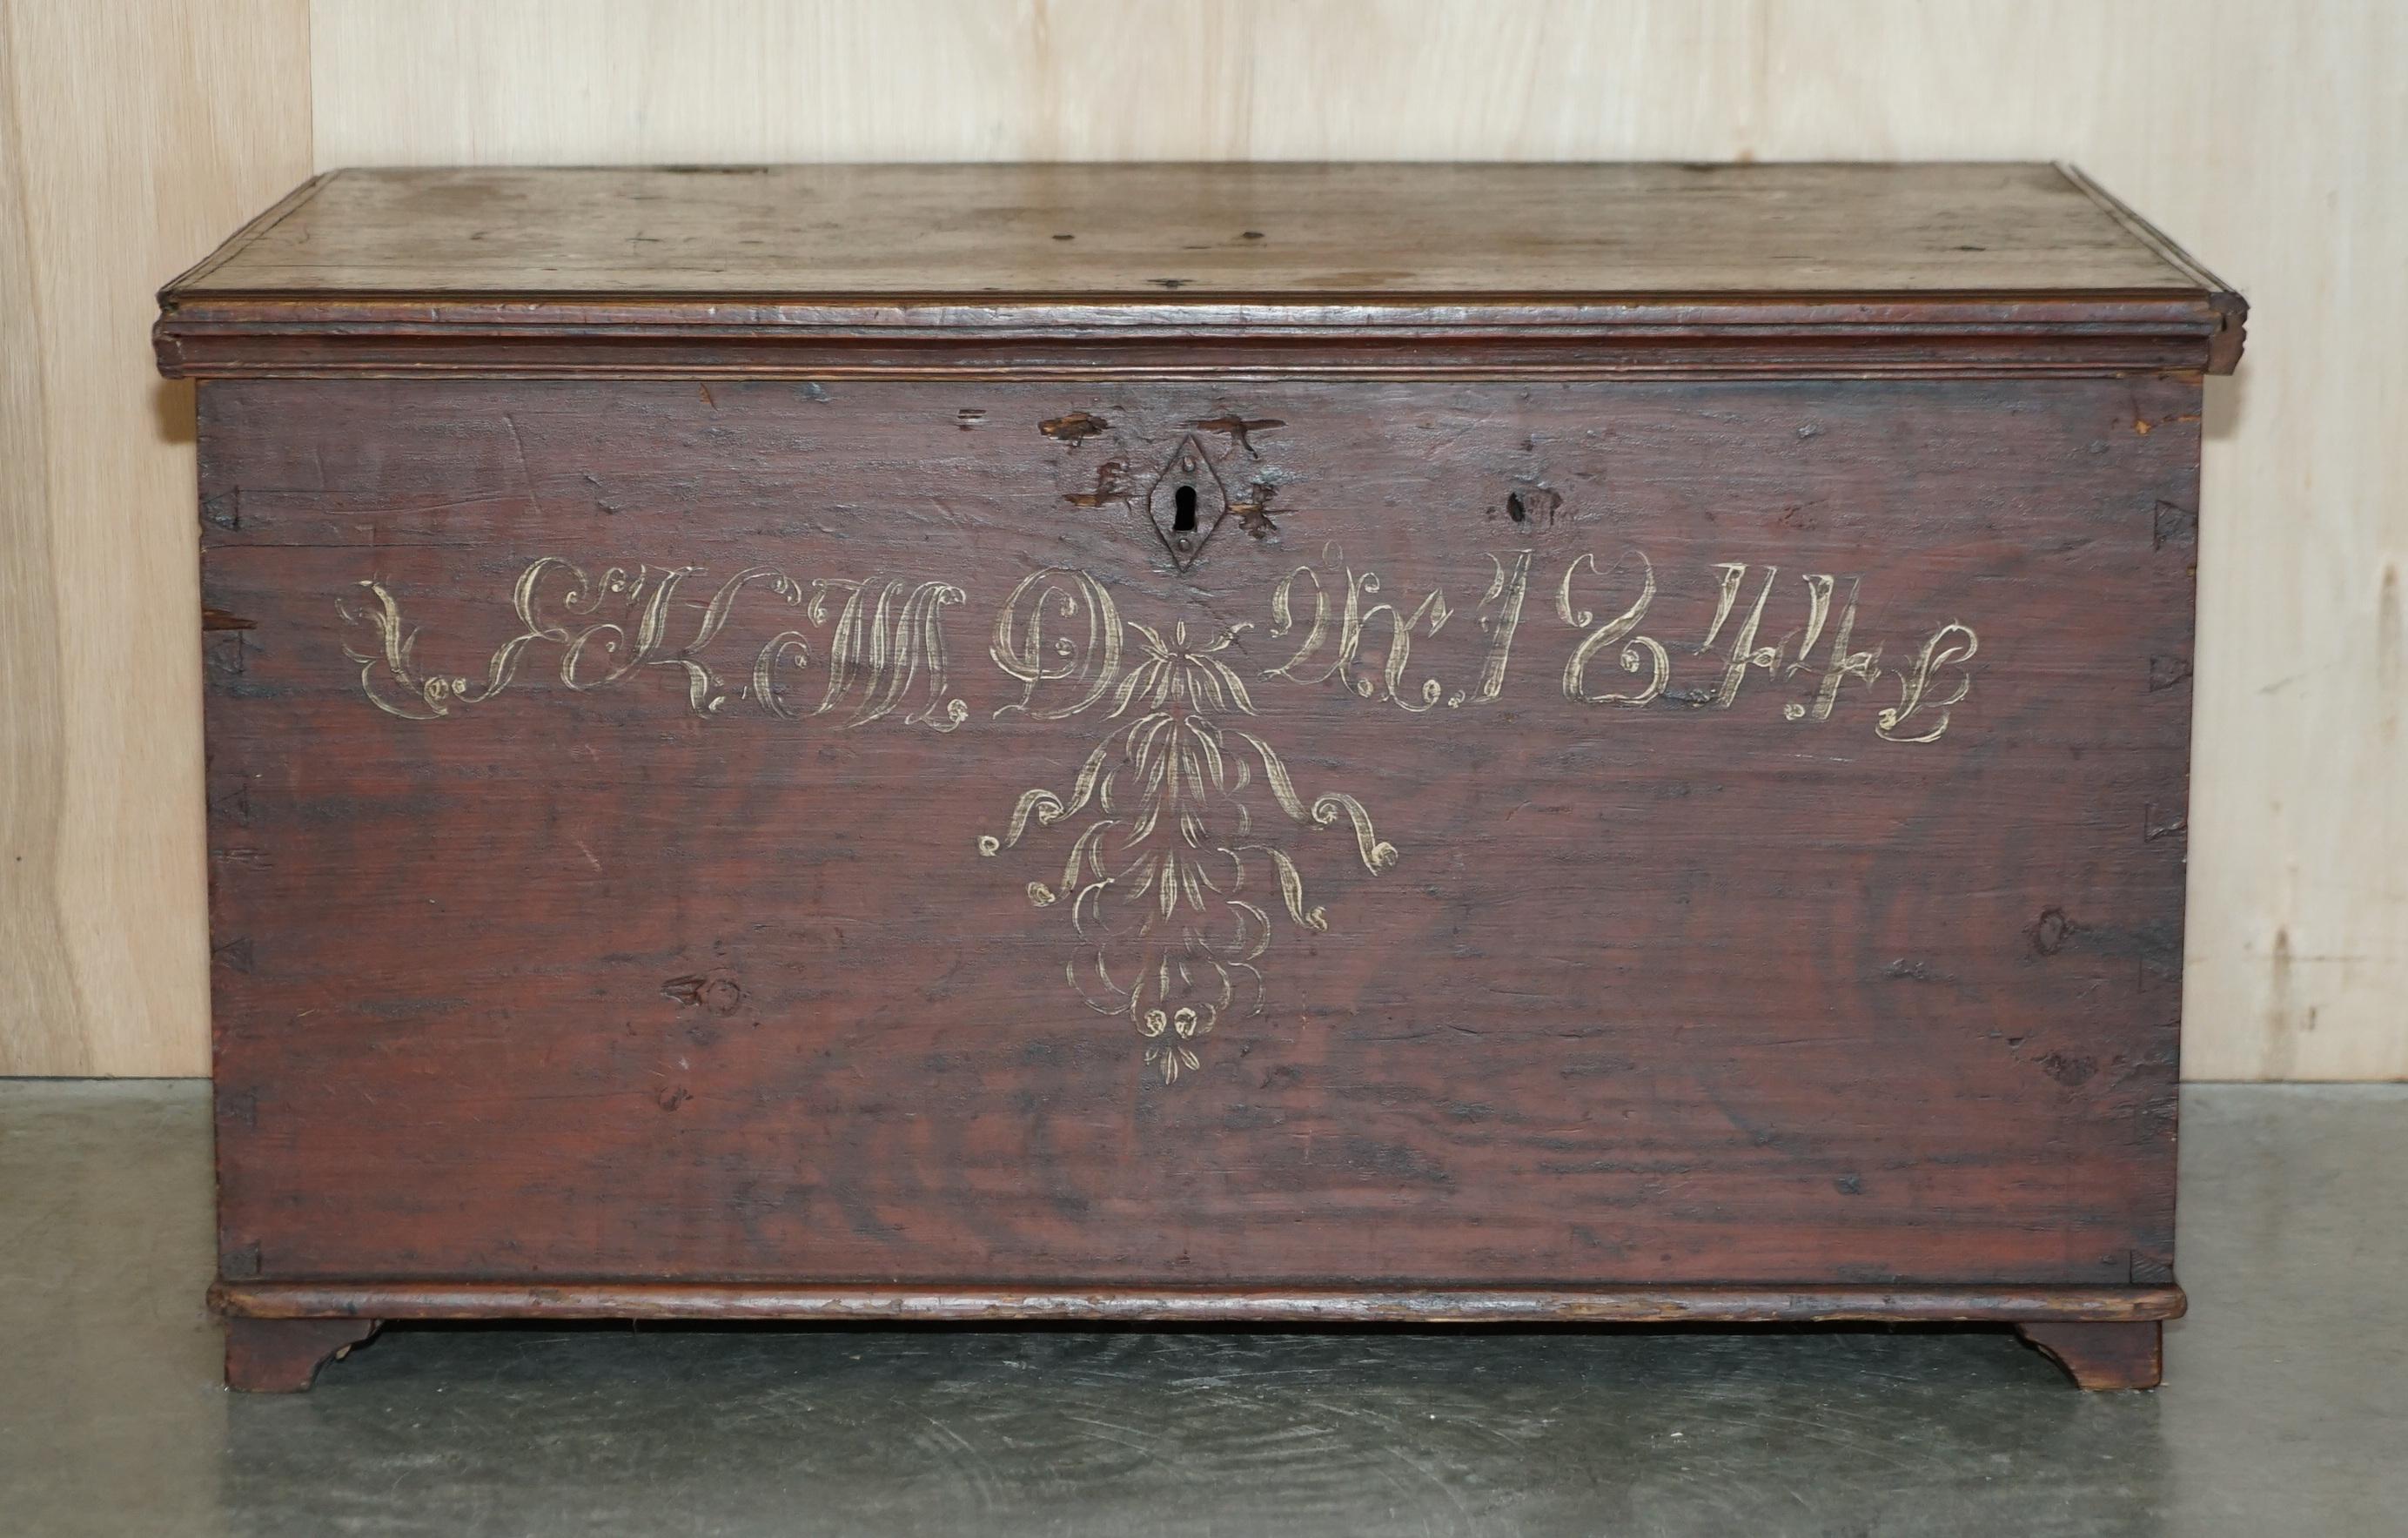 We are delighted to offer for sale this lovely original 1844 dated hand painted Swedish trunk or chest.

A very good looking and well made piece. A typical hand painted European piece which is highly collectable and very versatile. It comes complete